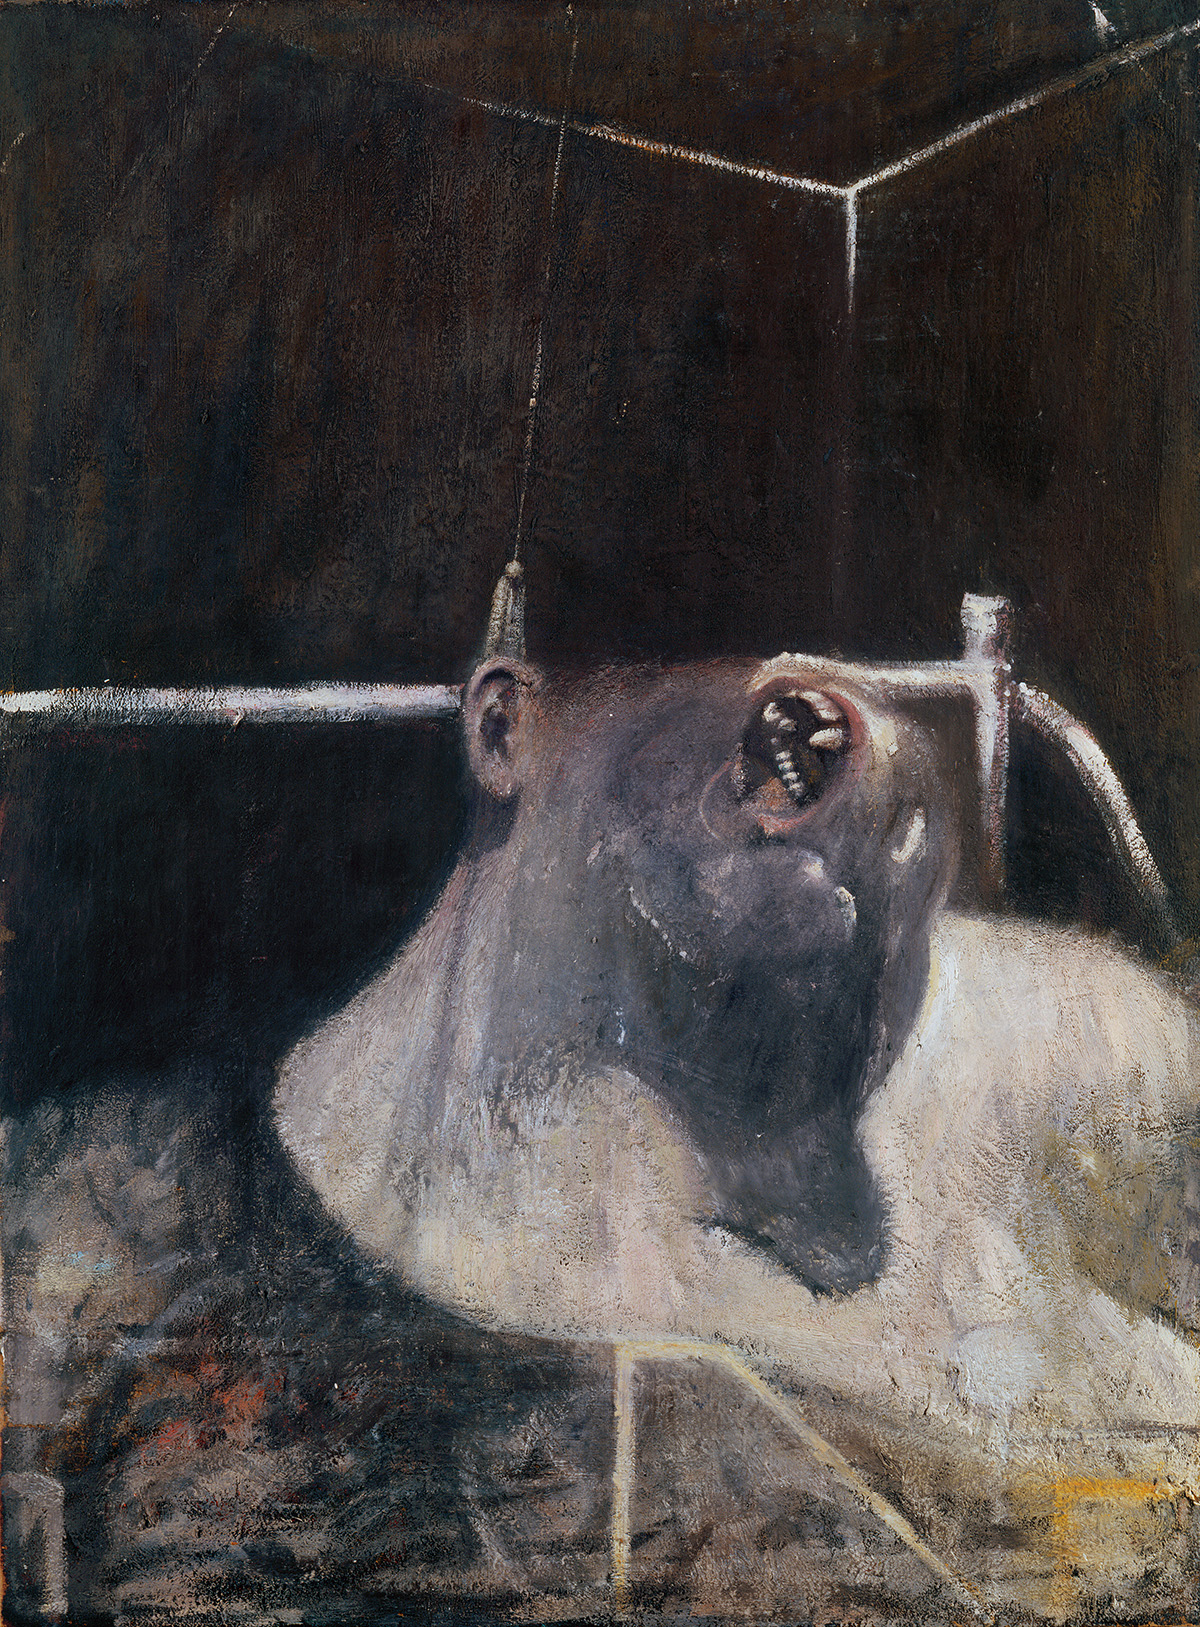 ncis Bacon, Head I, 1948. Oil and tempera on hardboard. CR number 48-01. © The Estate of Francis Bacon / DACS London 2019. All rights reserved.ncis Bacon, Head I, 1948. Oil and tempera on hardboard. CR number 48-01. © The Estate of Francis Bacon / DACS London 2019. All rights reserved.